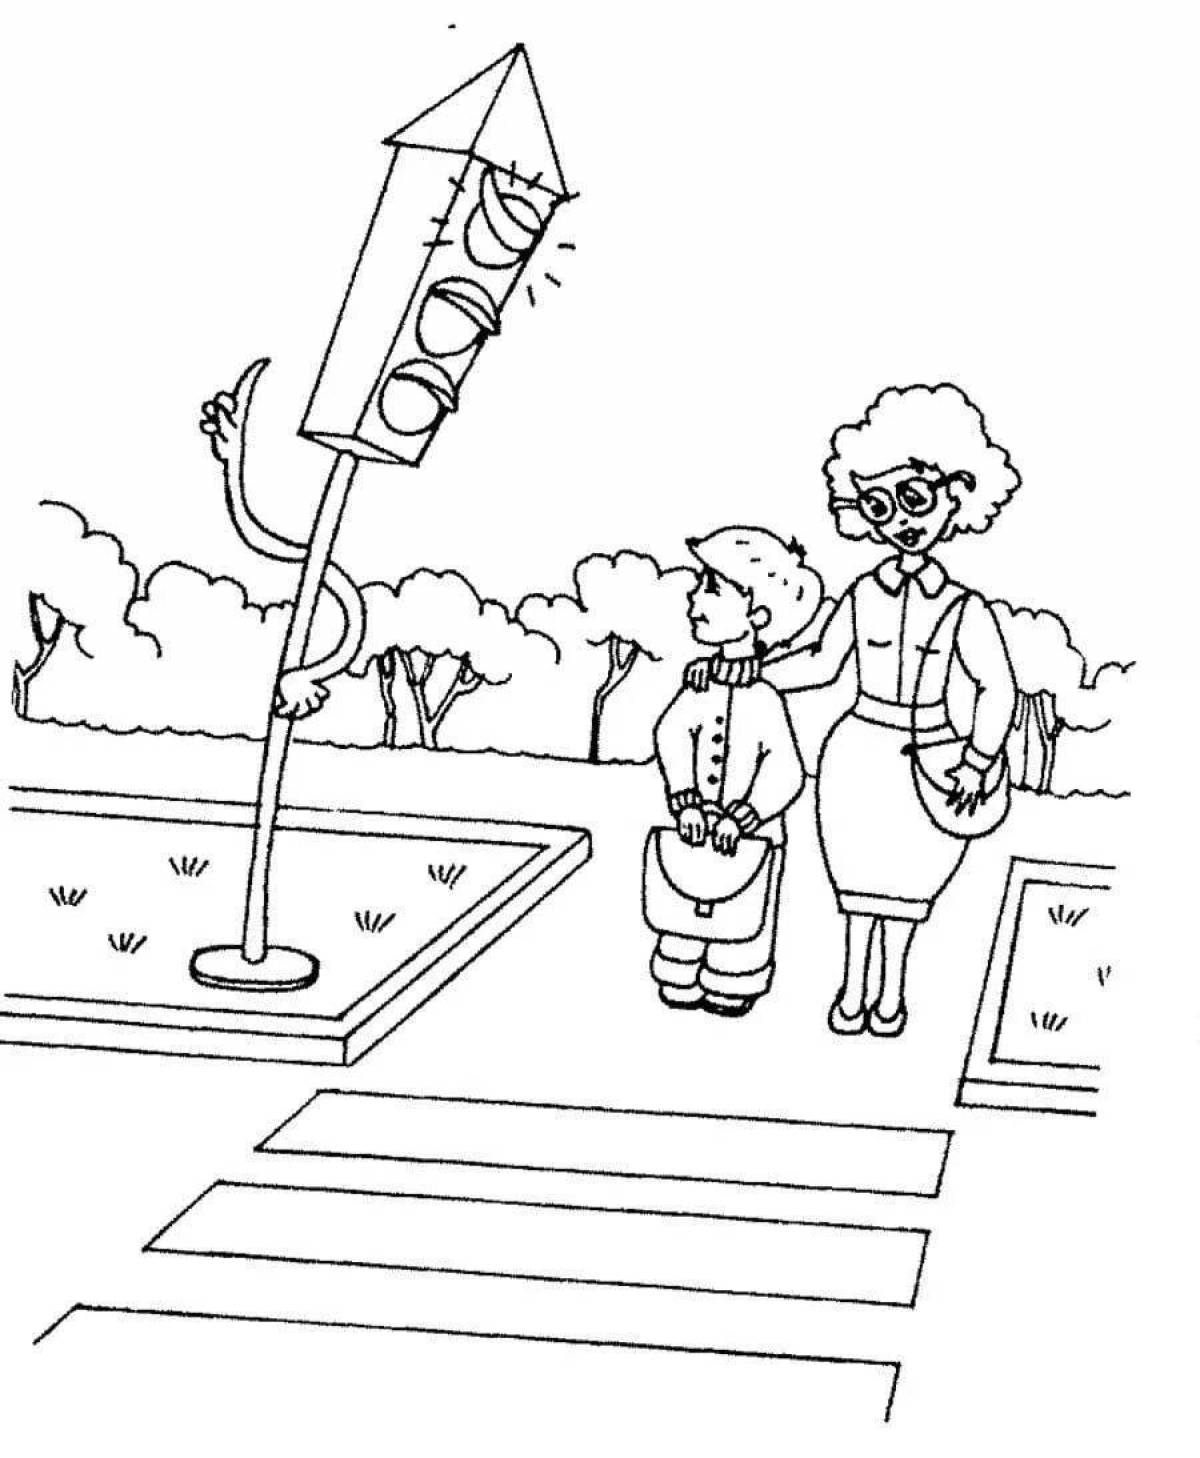 Serene way home coloring page